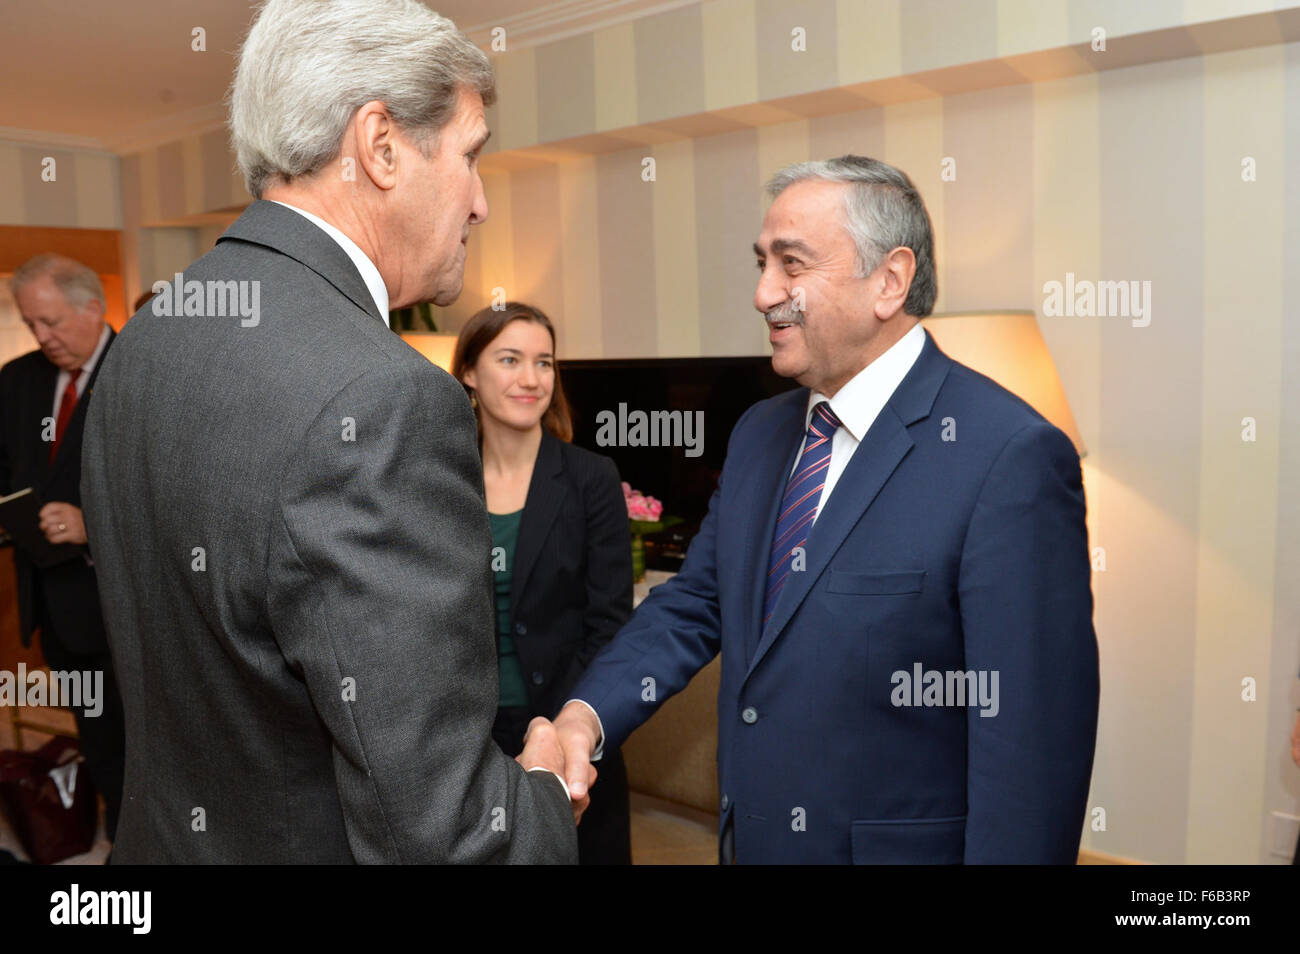 Secretary Kerry Greets Turkish Cypriot Leader Akinci Before Their Meeting in New York City Stock Photo